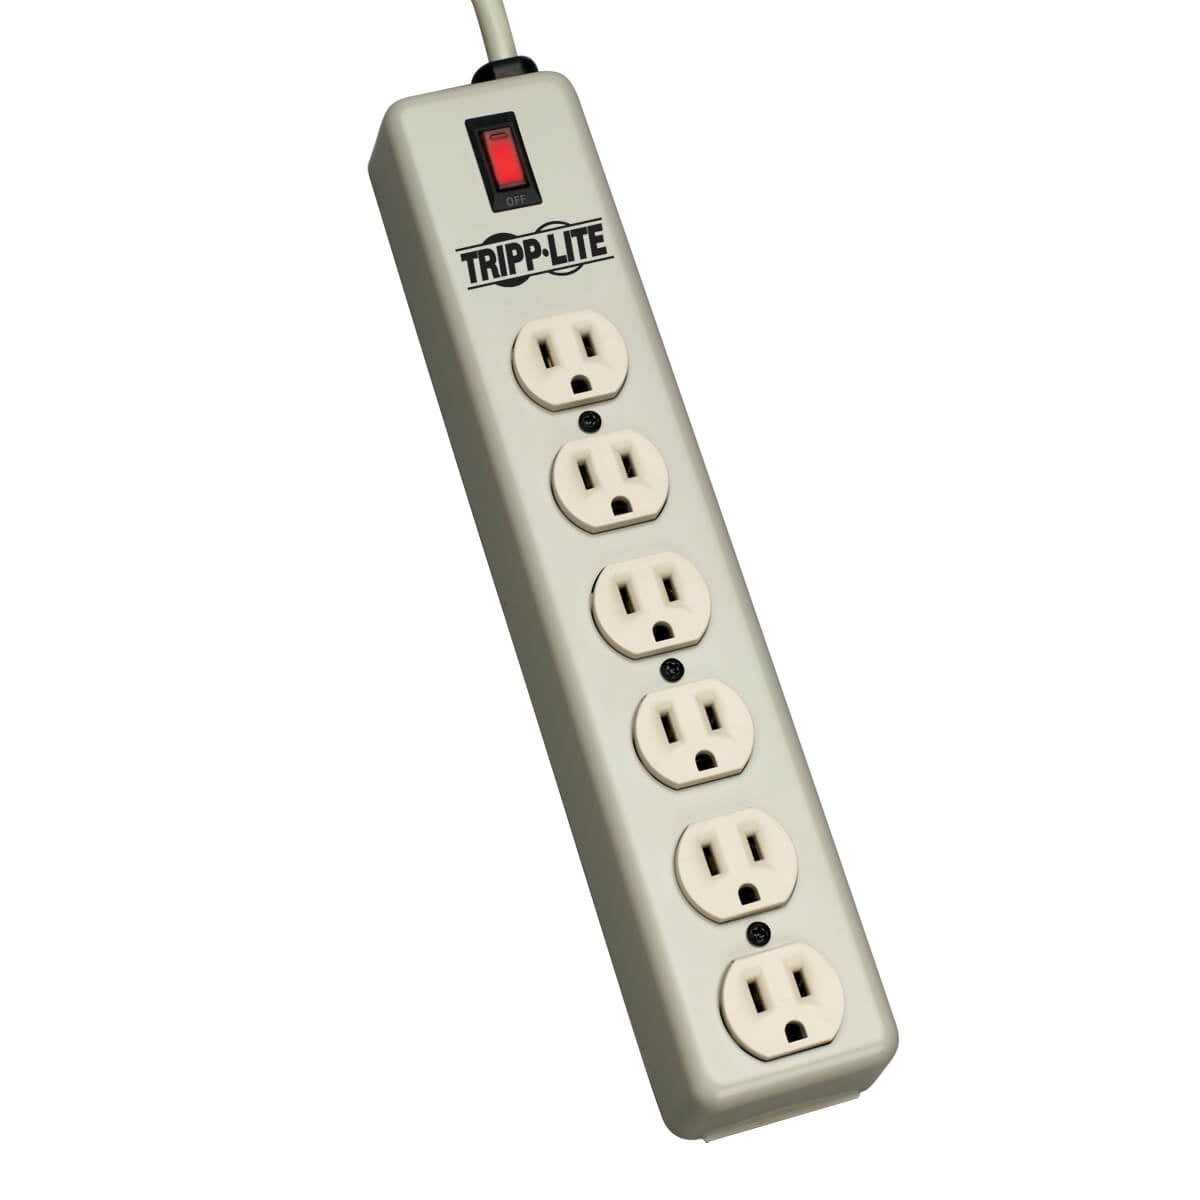 8 Outlet Surge Protector Power Strip 2400J 2x USB 2.1A Right Angle Plug 6FT CORD 